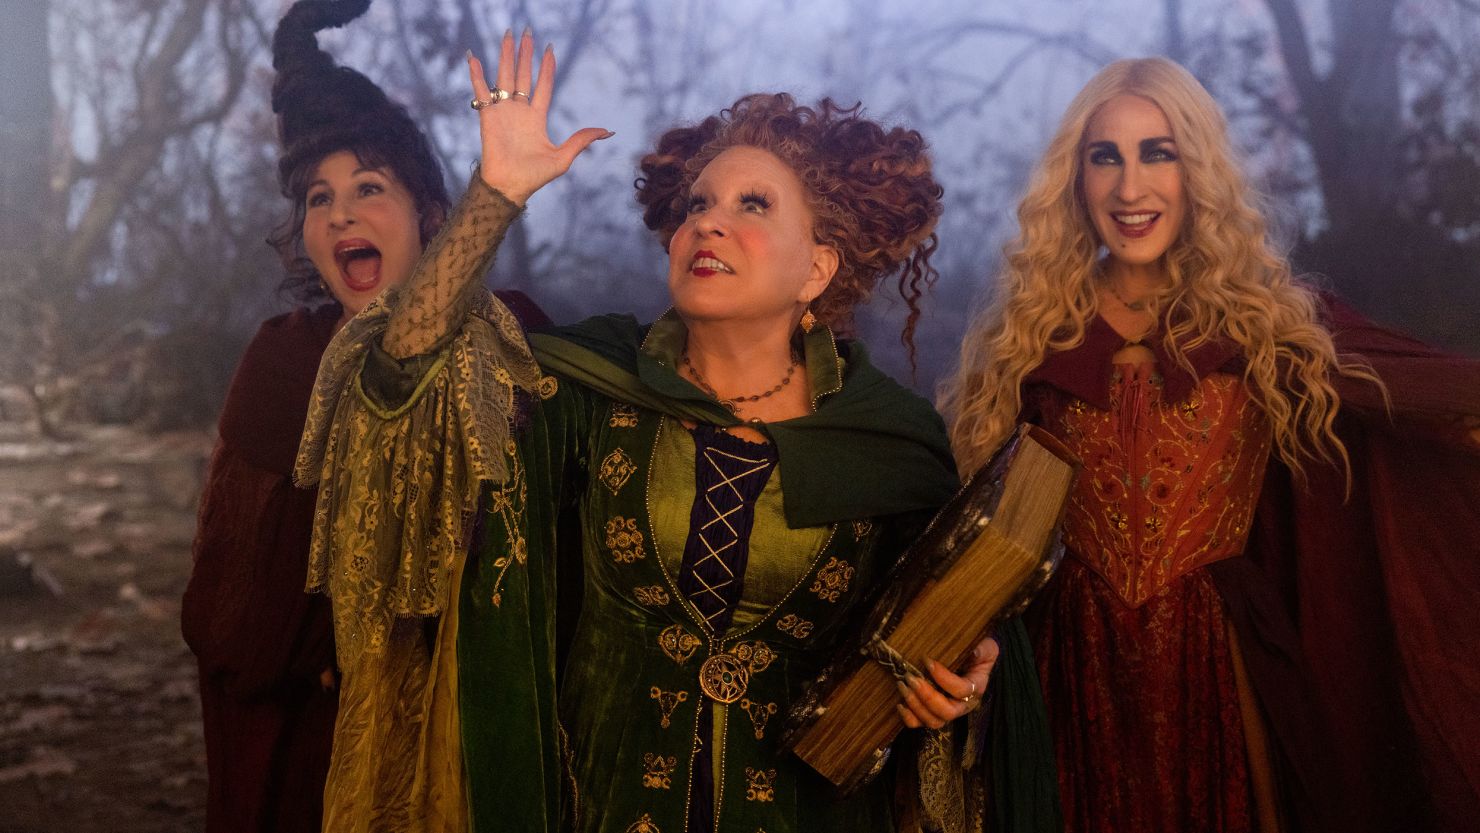 Kathy Najimy, Bette Midler and Sarah Jessica Parker return as the Sanderson sisters in 'Hocus Pocus 2' on Disney+.